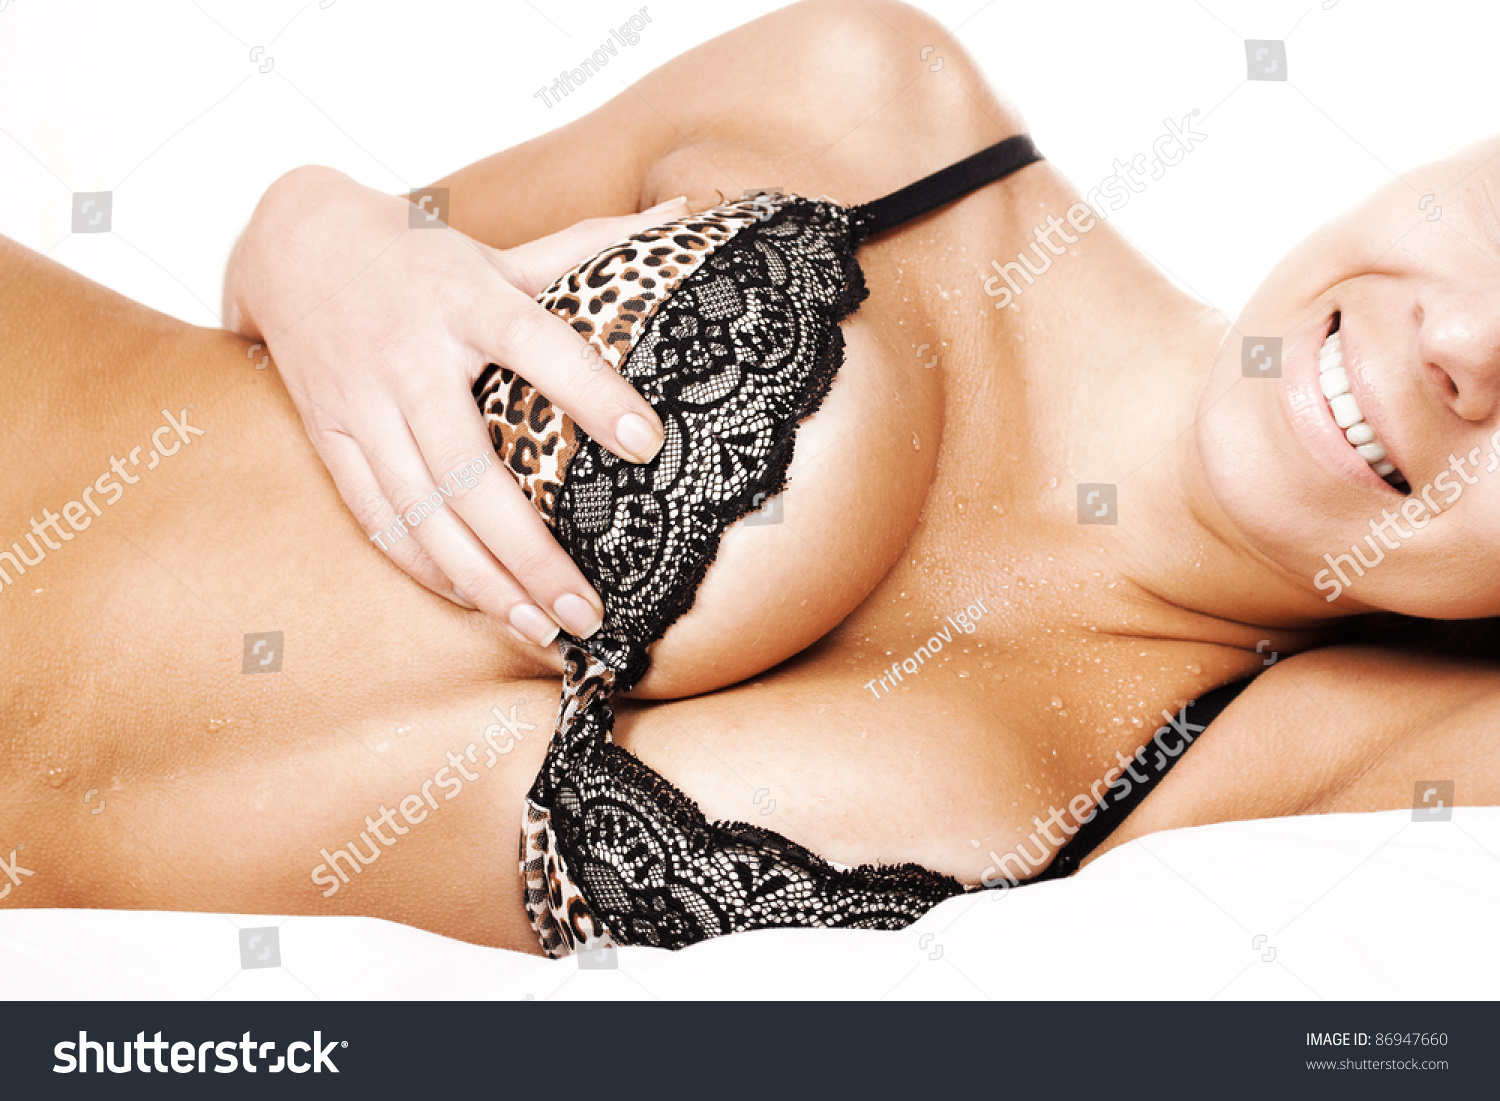 Busty sexy black girls Sexy Wet Busty Girl Black Lingerie Stock Photo Edit Now 86947660